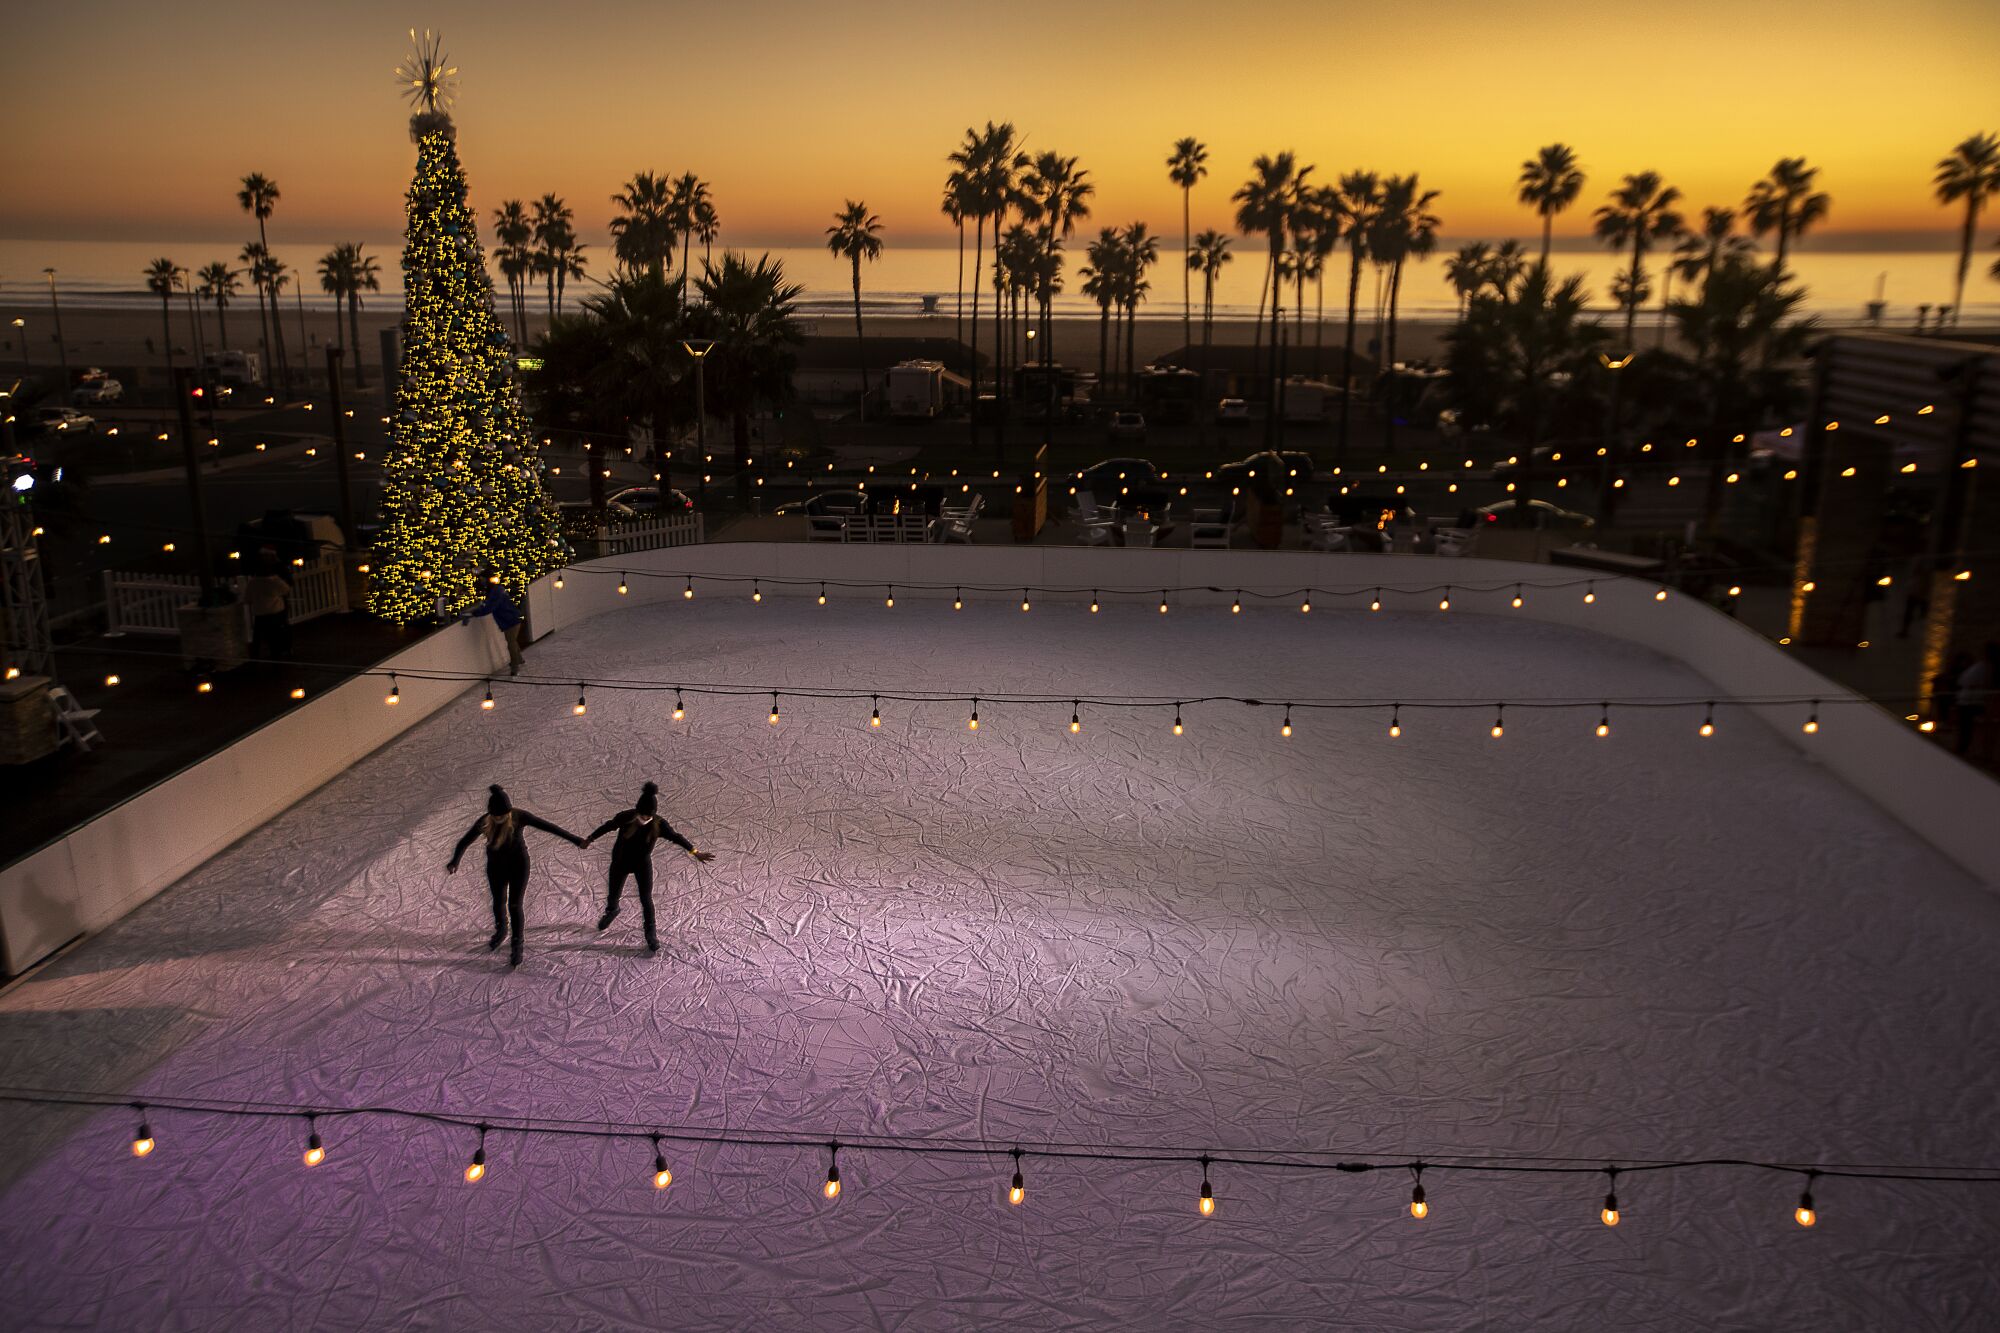 Two people hold hands as they skate on an otherwise empty rink at twilight. Sunset illuminates a beach behind them.